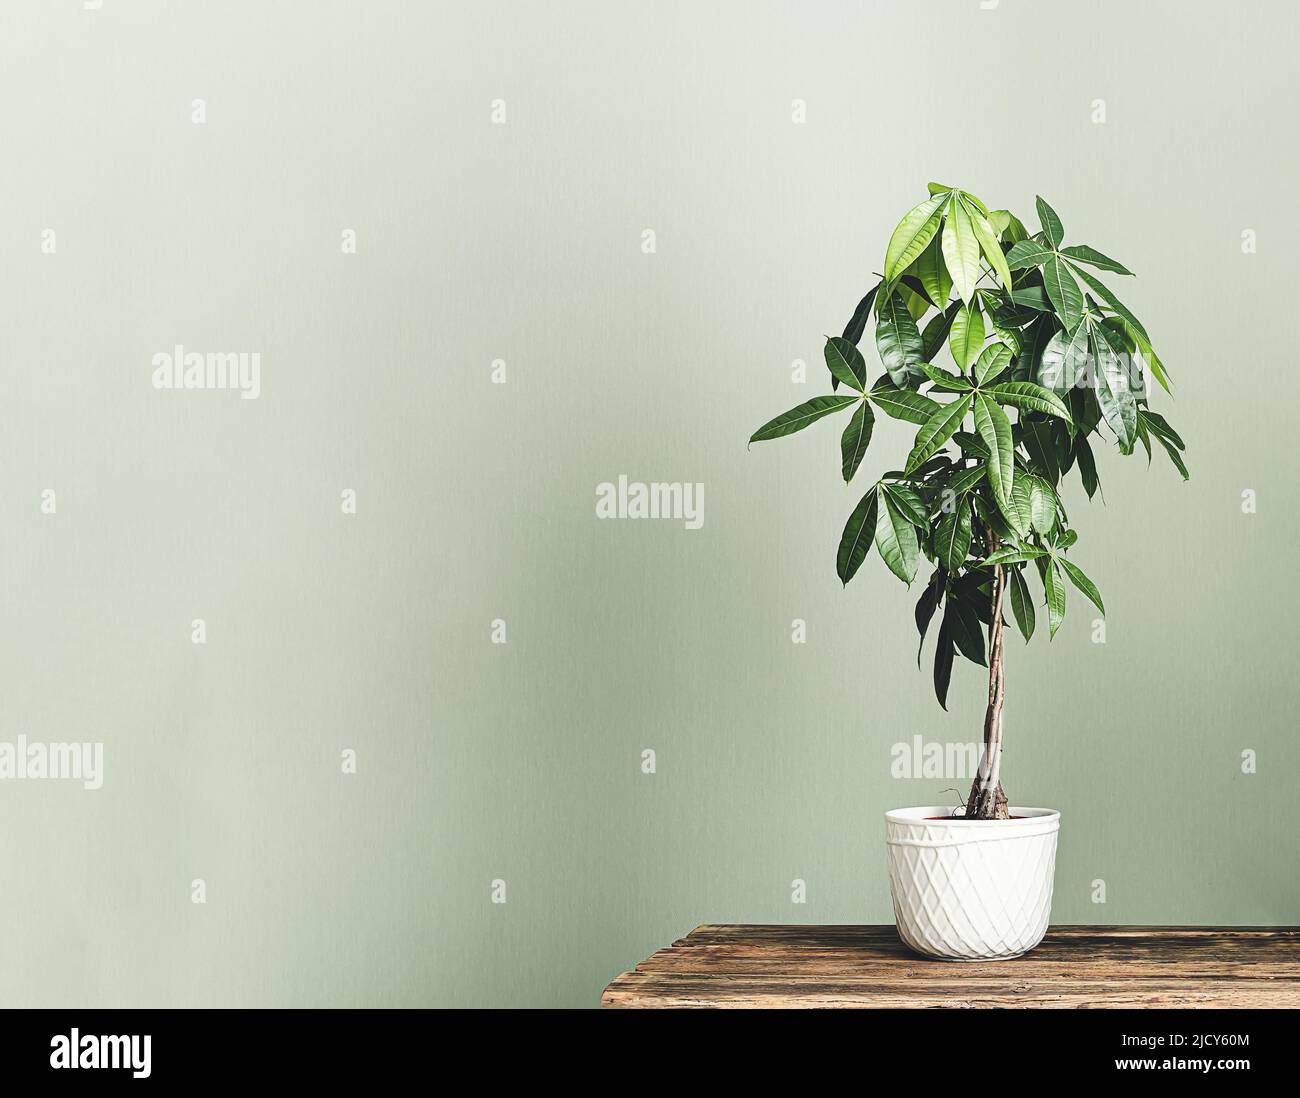 Pachira aquatica (Guiana Chestnut or Money tree) in a white flower pot on the wooden table isolated on a light green background, minimalism and scandi Stock Photo